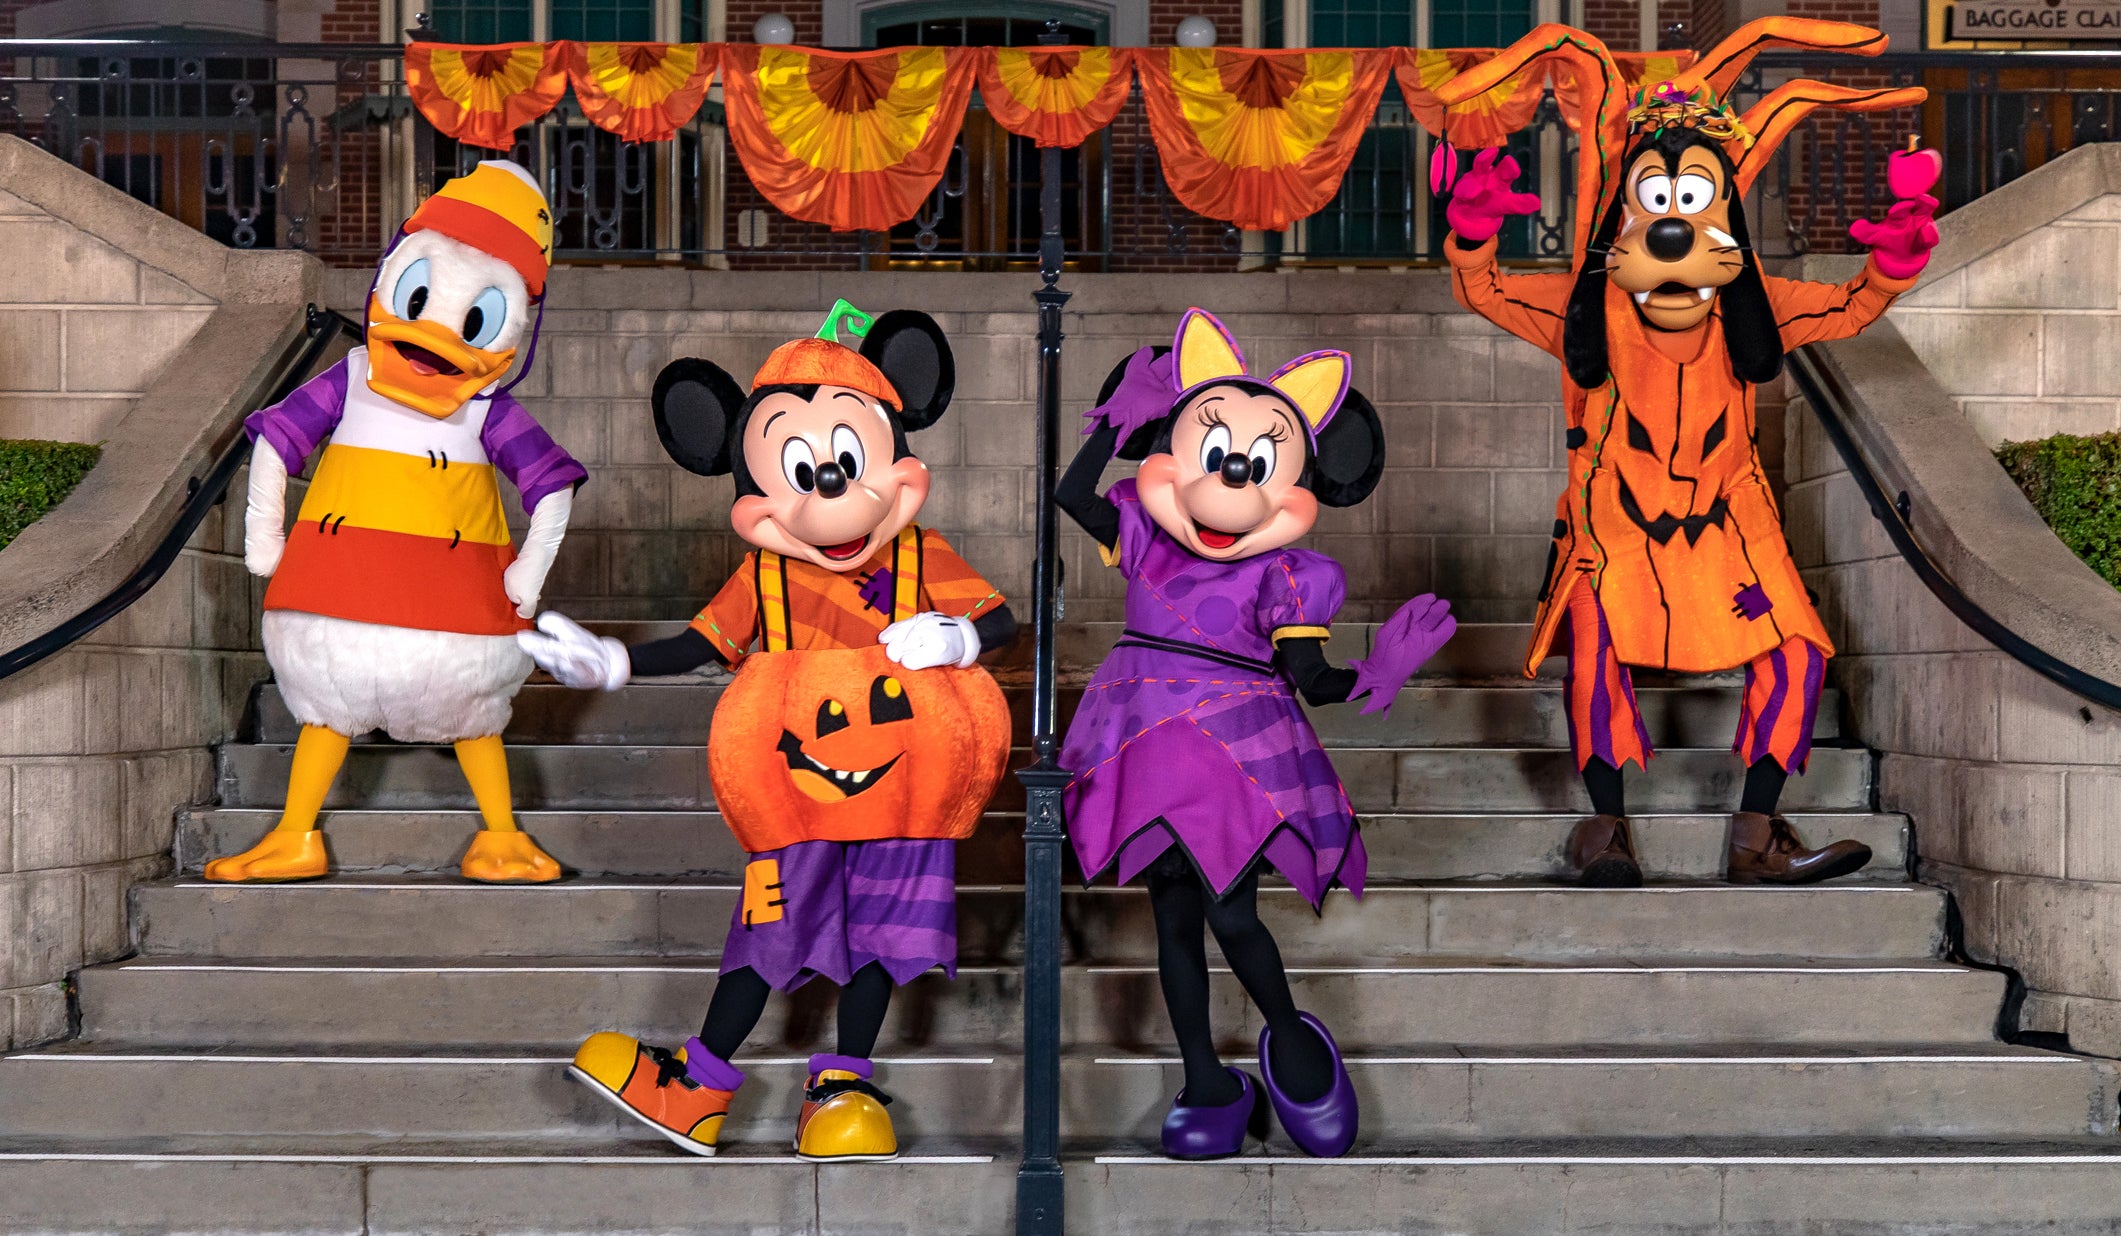 File: In this handout photo provided by Disney Resorts, Mickey Mouse, Minnie Mouse and pals debut new attire while celebrating Halloween at Disneyland Park on 2 September 2022 in Anaheim, California